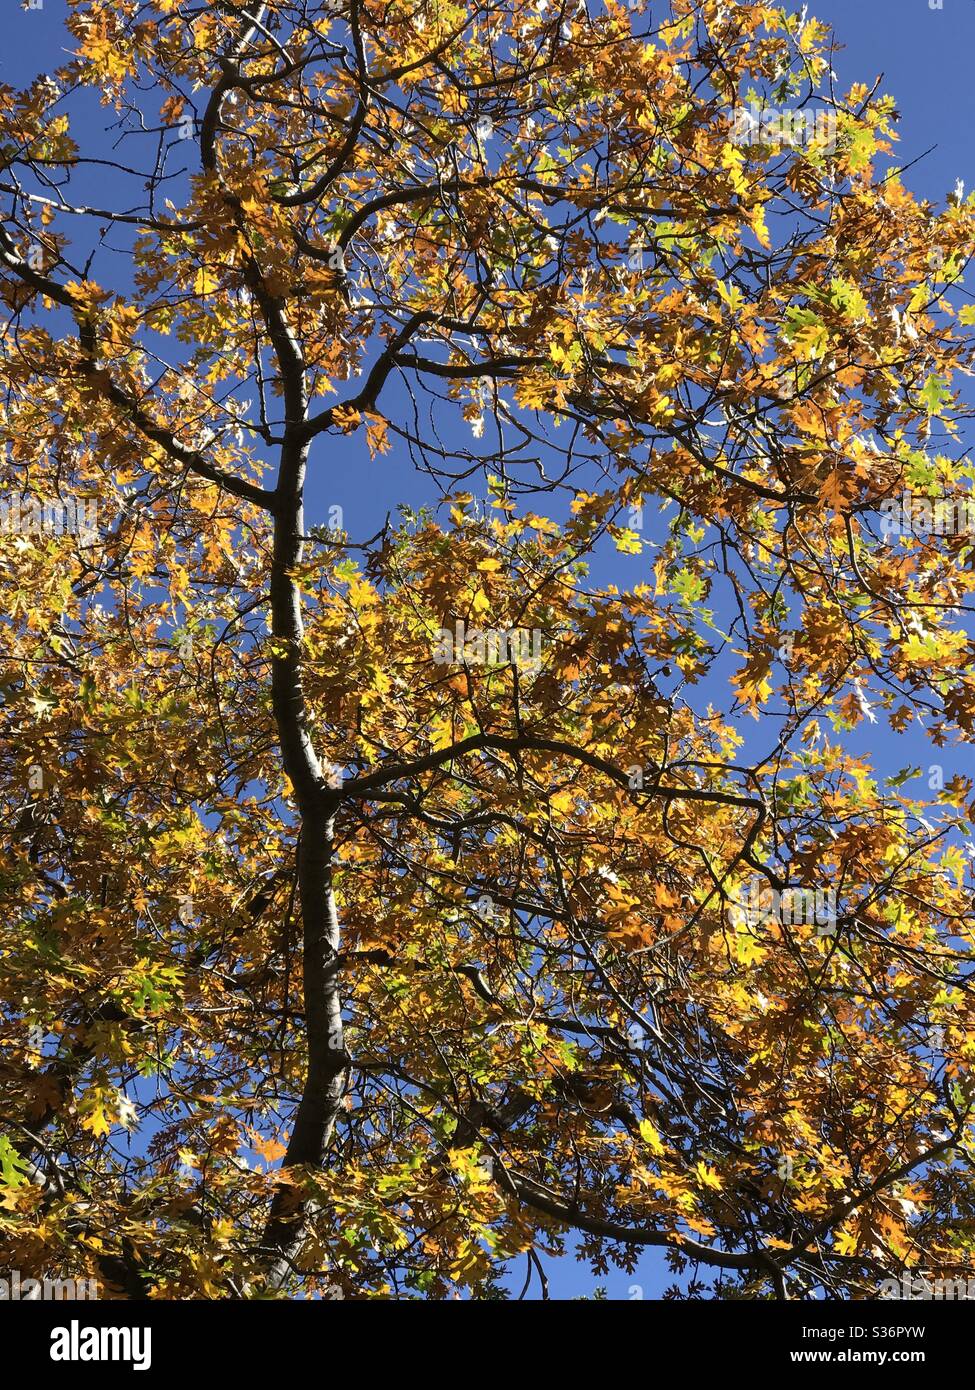 A long branch of the yellow leaves of an oak tree against a blue sky. Stock Photo